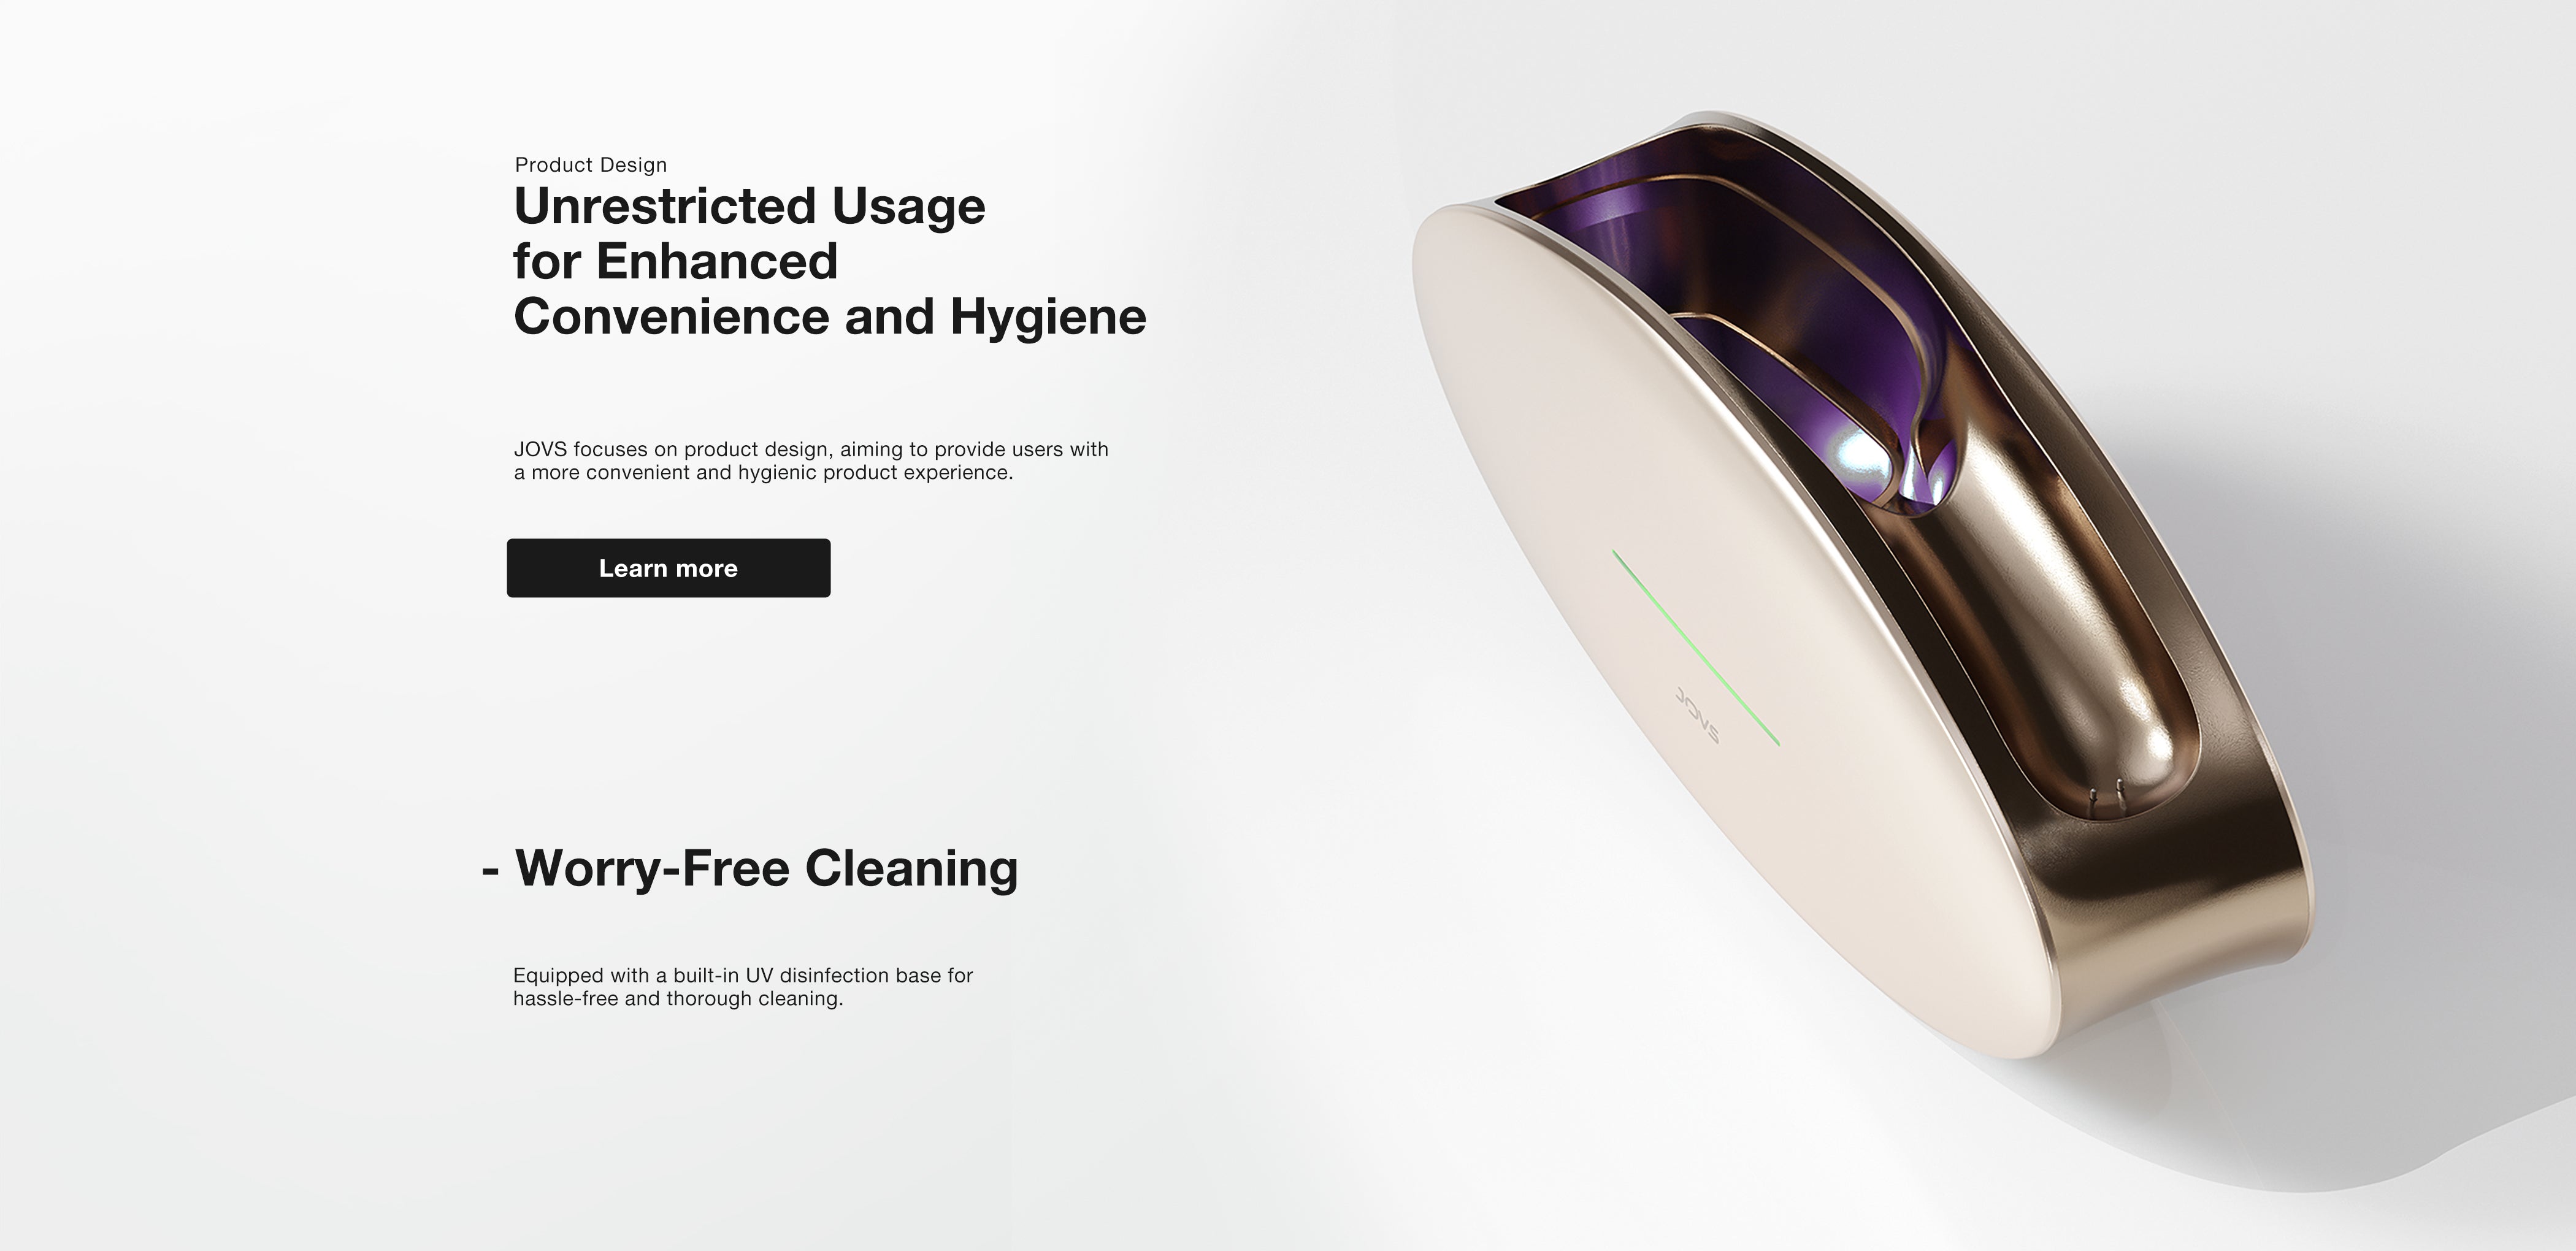 JOVS Slimax Microcurrent Full-Body Anti-Aging Device with Built-in UV Disinfection for Enhanced Hygiene.